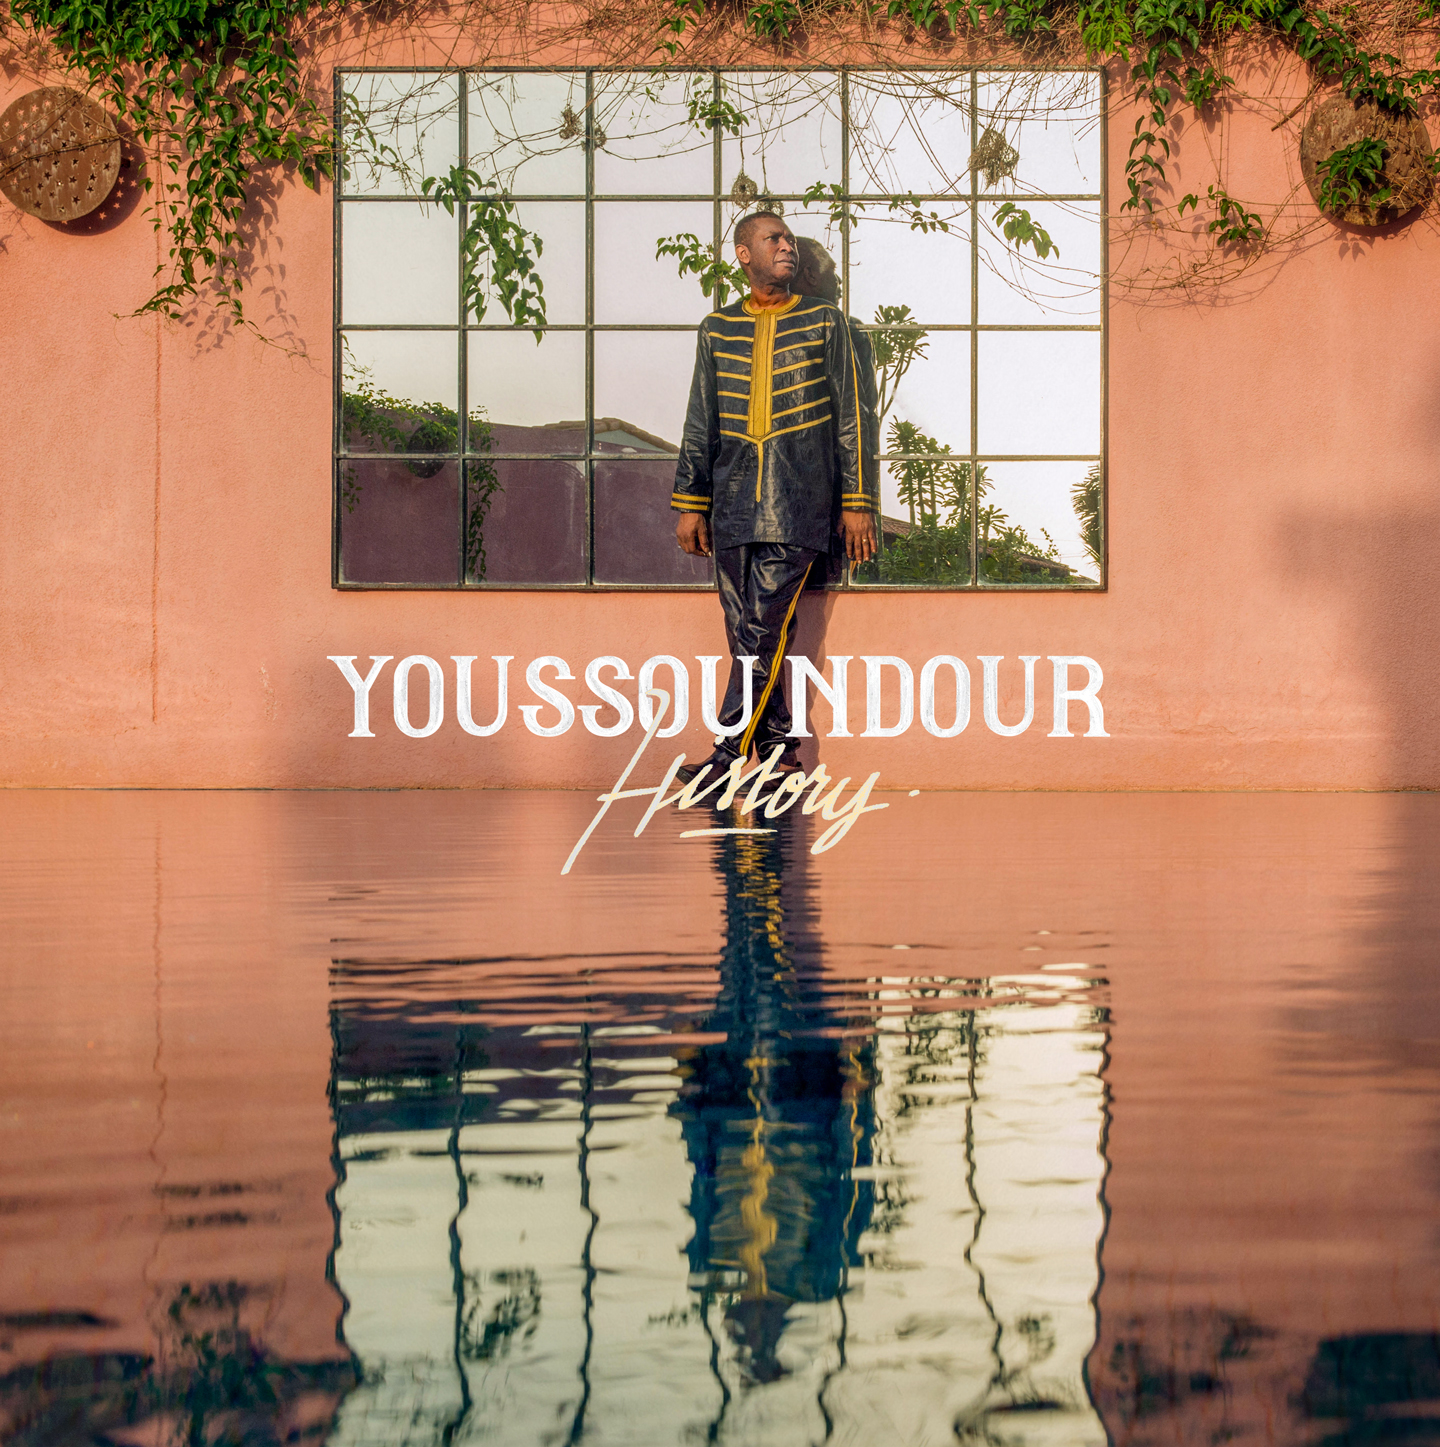 Youssou N’Dour’s new album, 'History' pays homage to great African artists, without losing sight of the future ahead